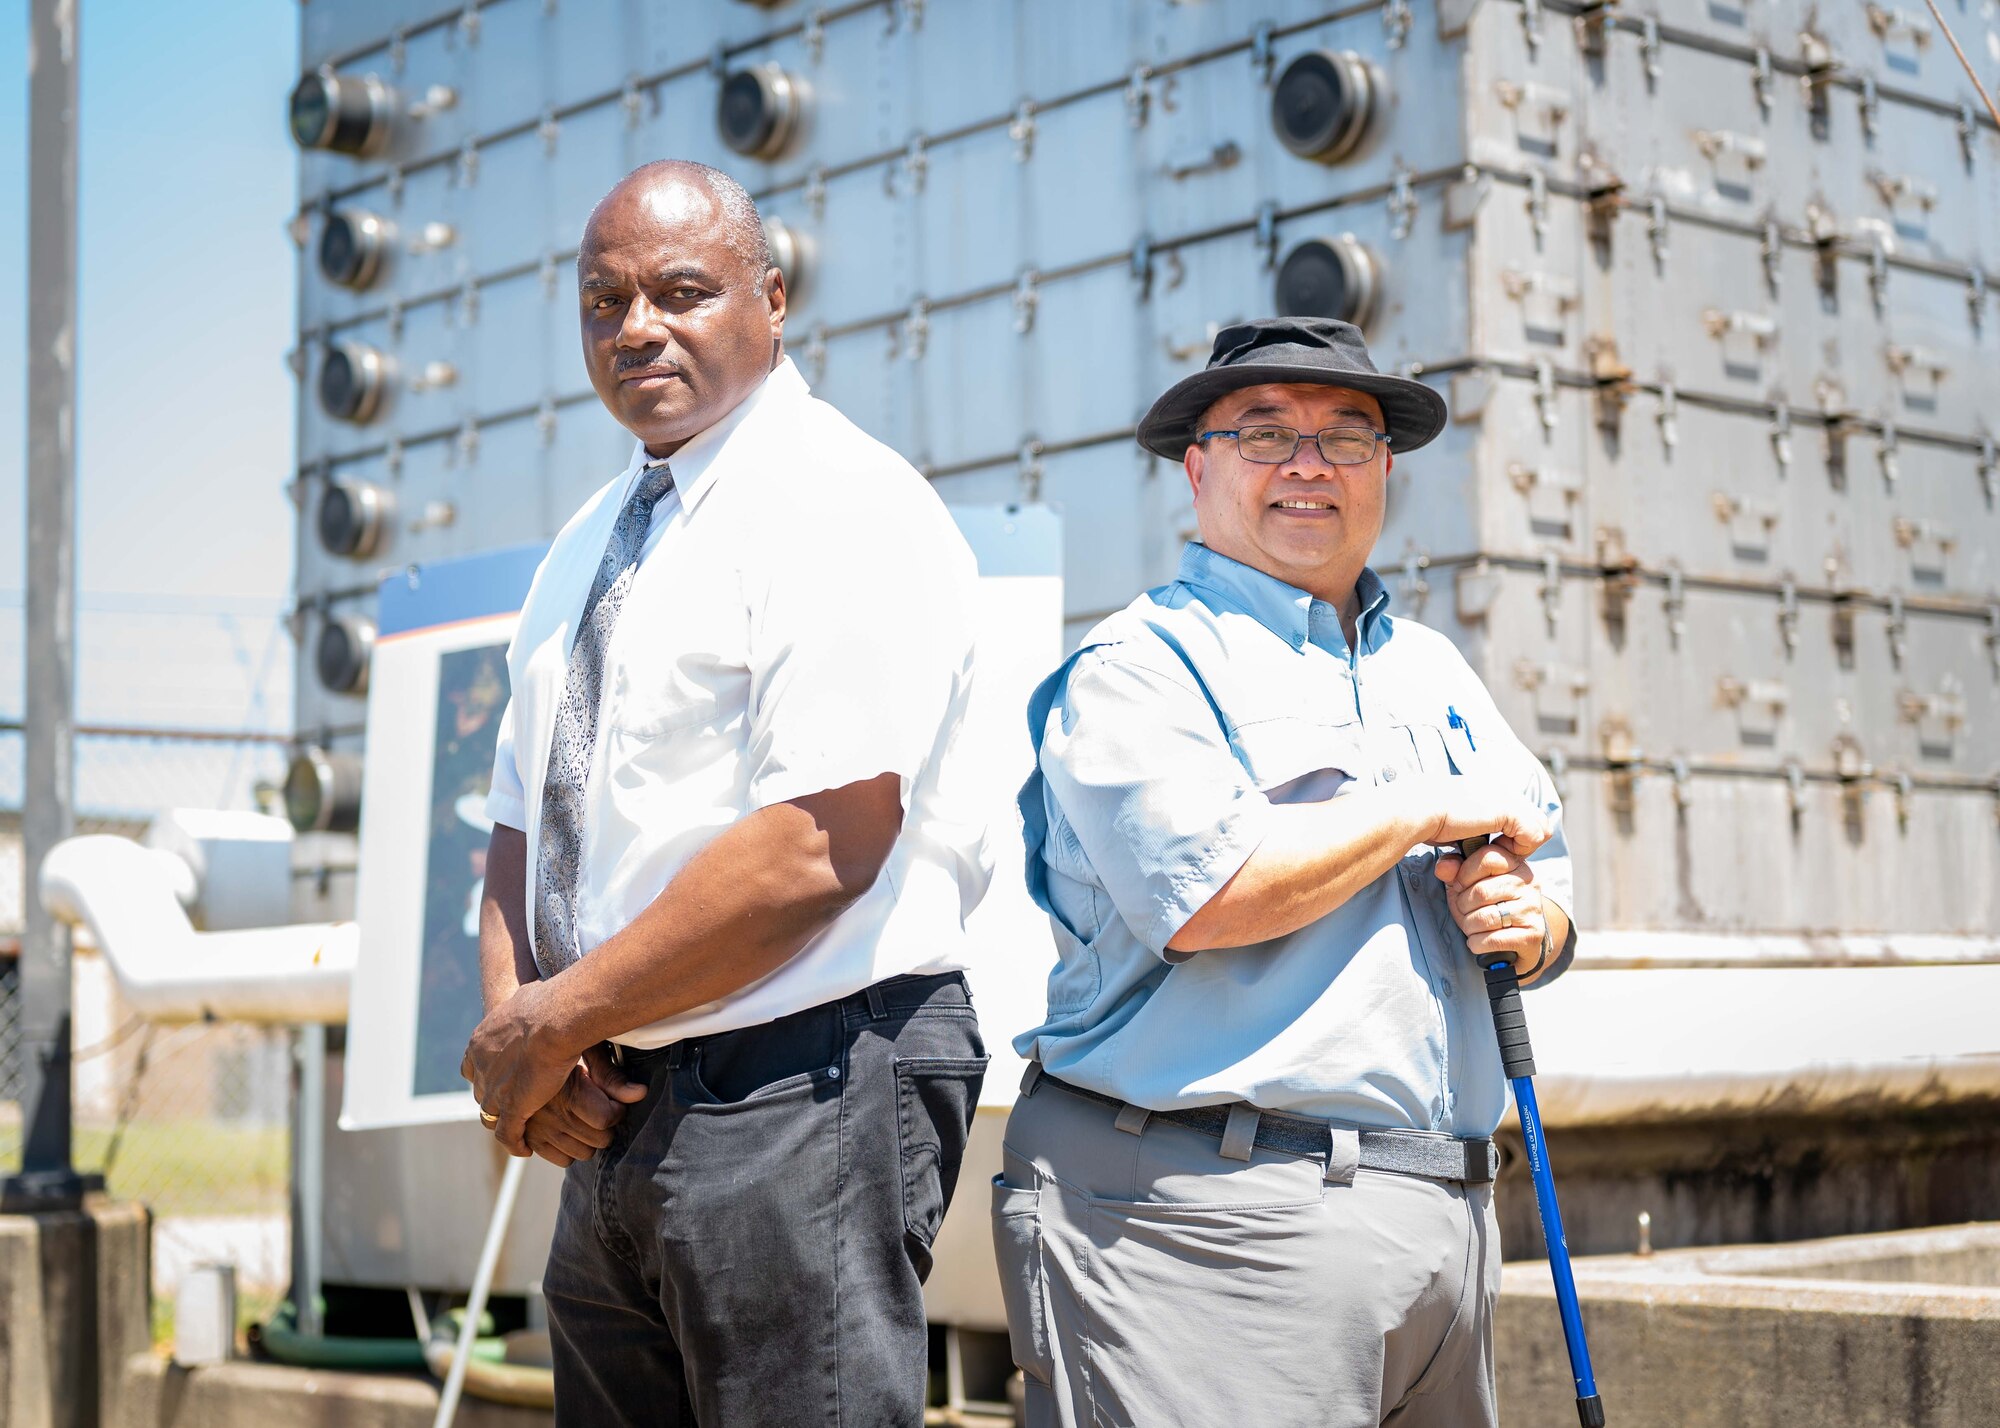 Wendell Williams (left) and Juvenal Salomon (right) pose for a photo in front of large groundwater treatment infrastructure.